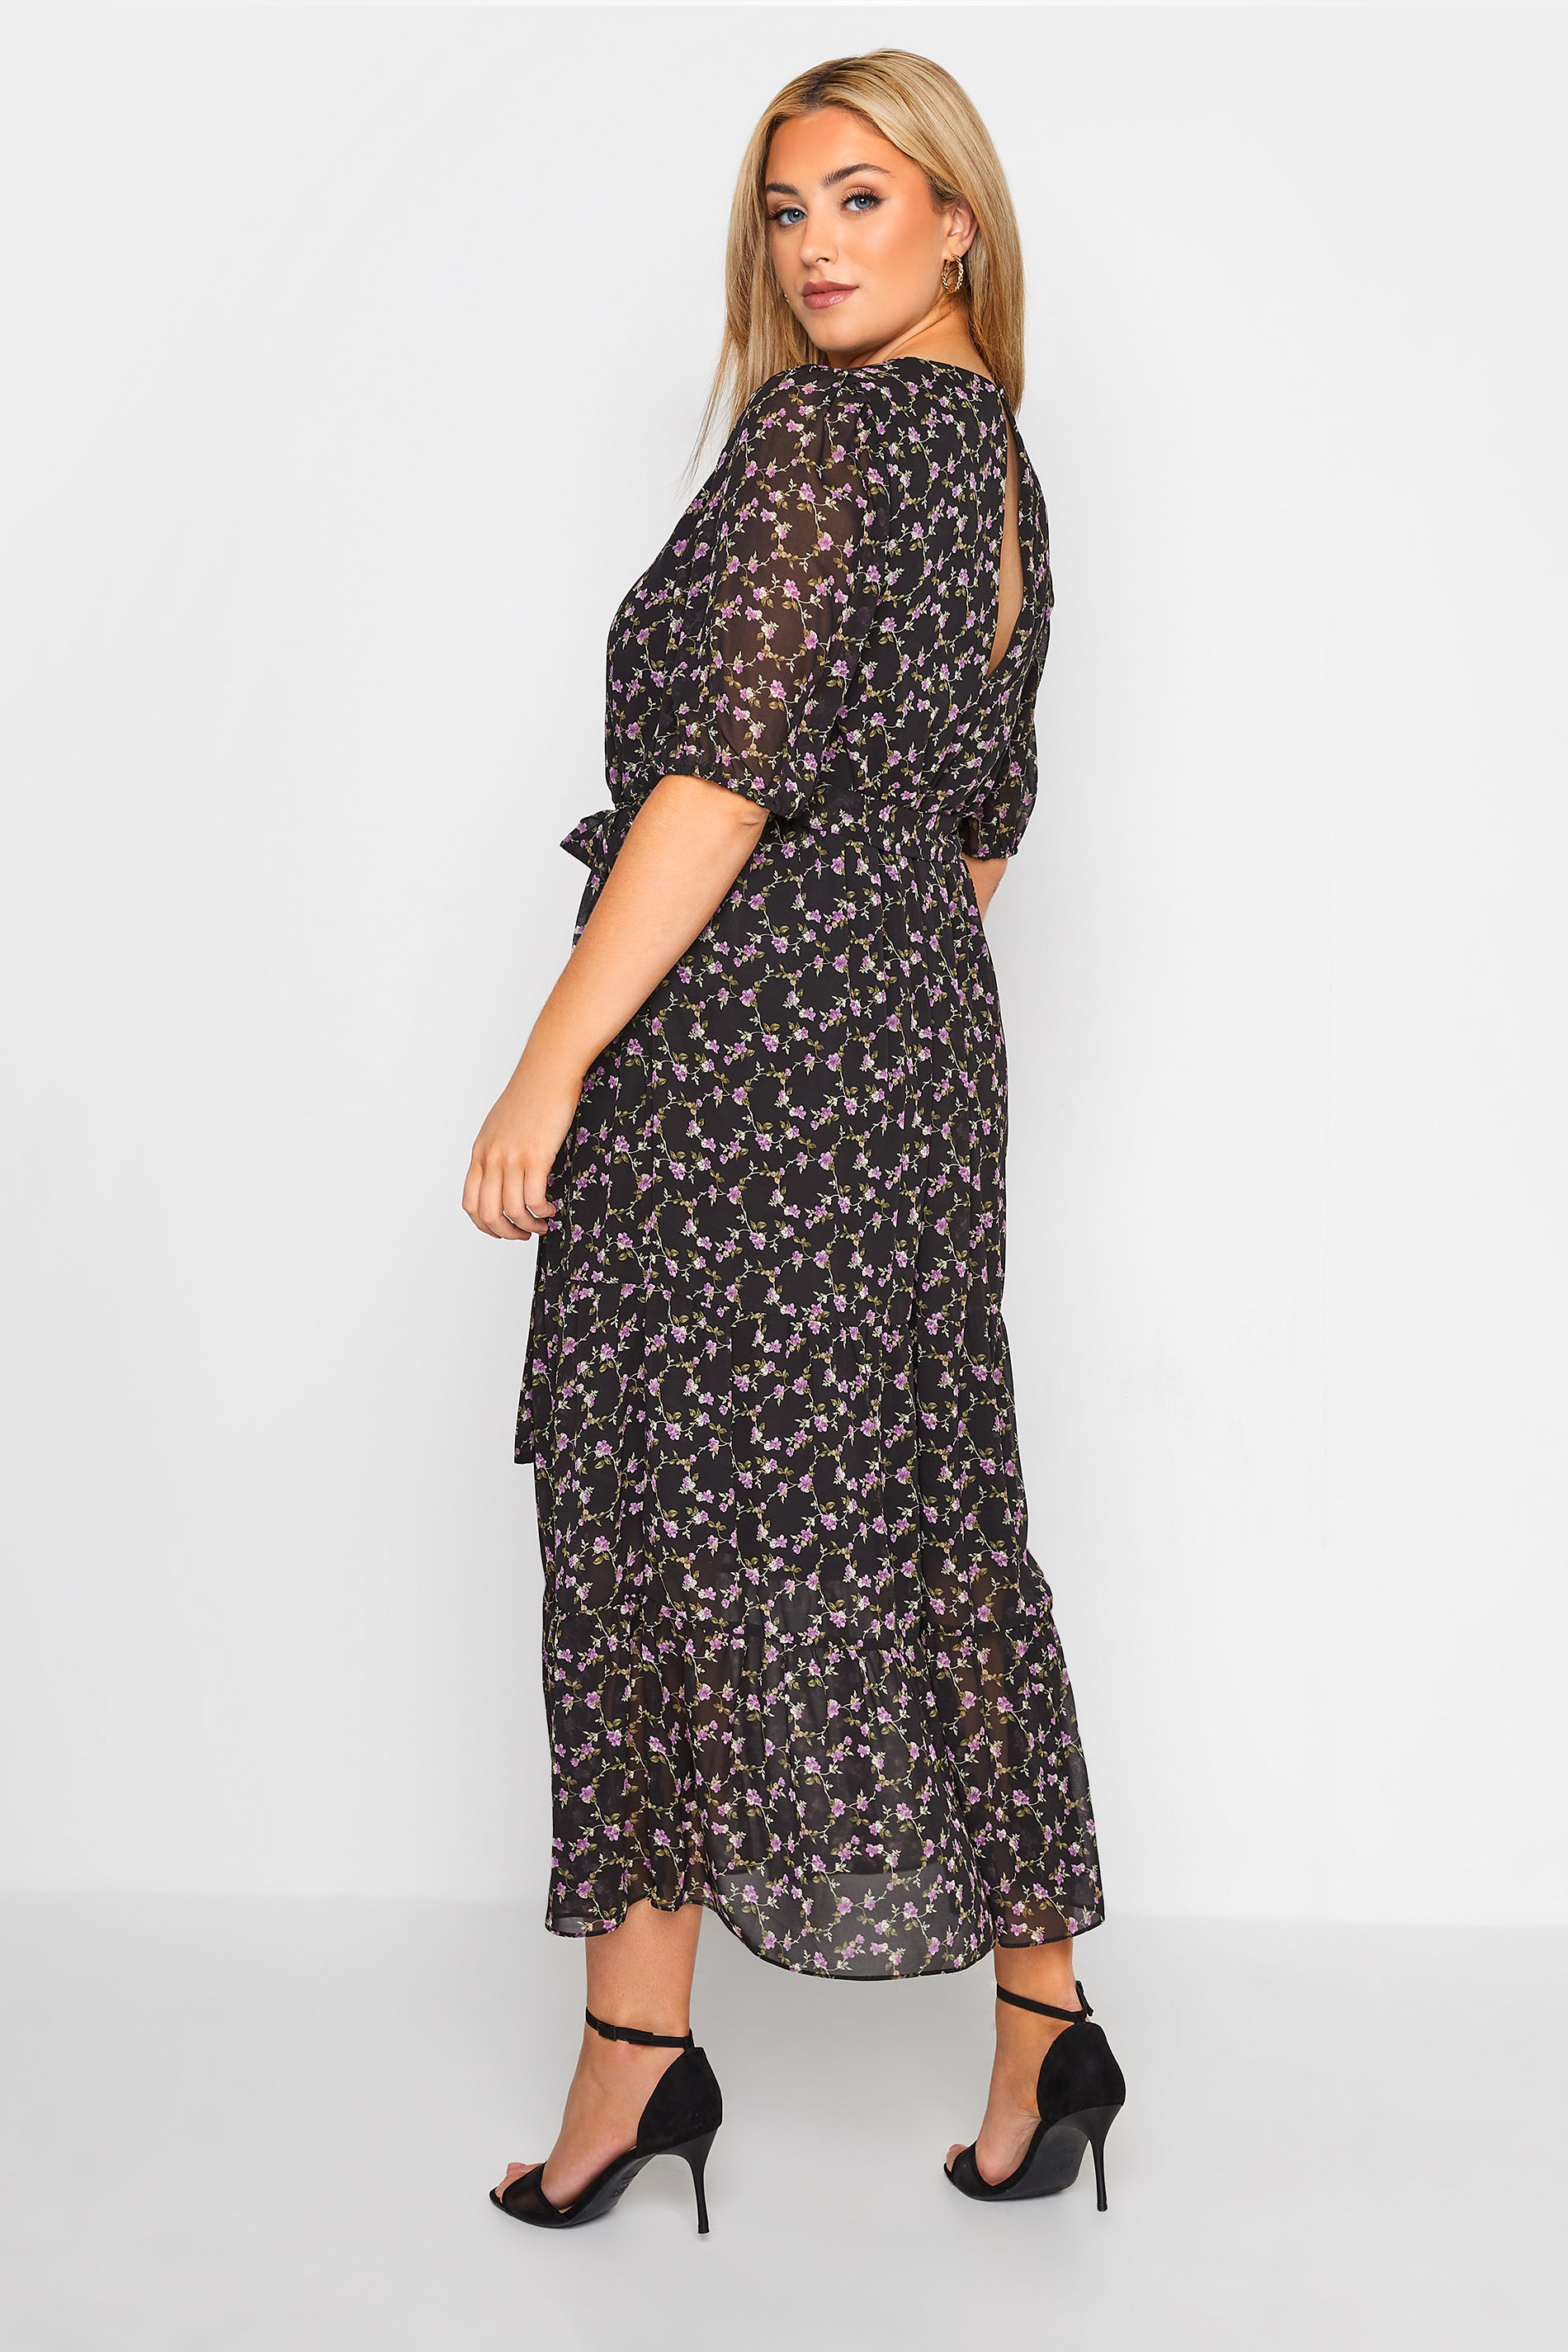 YOURS LONDON Plus Size Black Ditsy Smock Maxi Dress | Yours Clothing  3